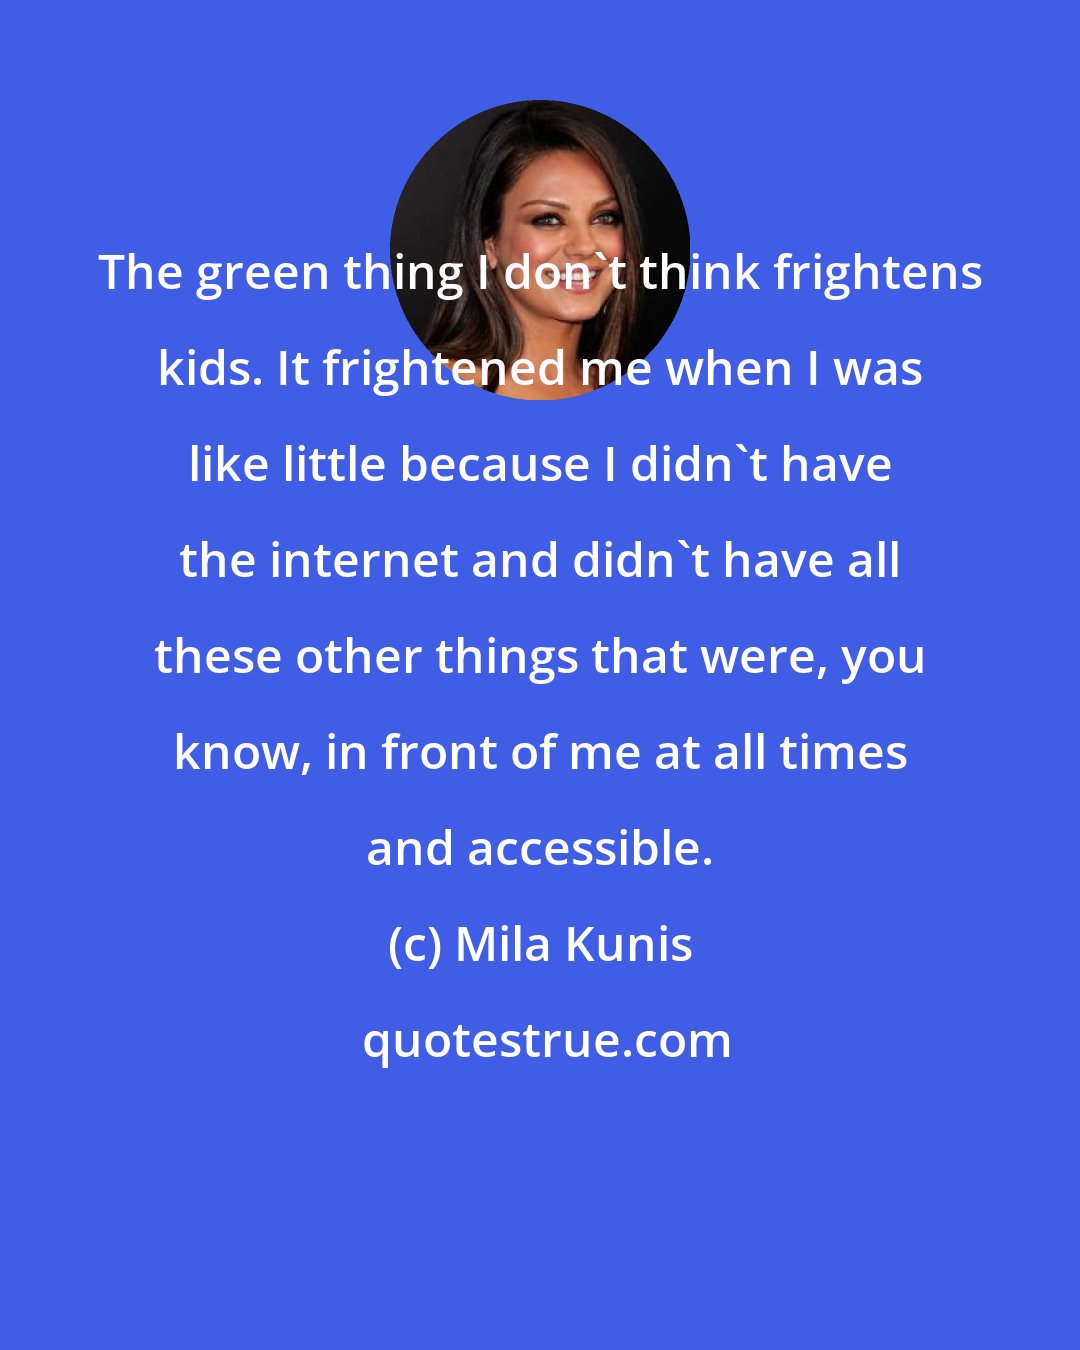 Mila Kunis: The green thing I don't think frightens kids. It frightened me when I was like little because I didn't have the internet and didn't have all these other things that were, you know, in front of me at all times and accessible.